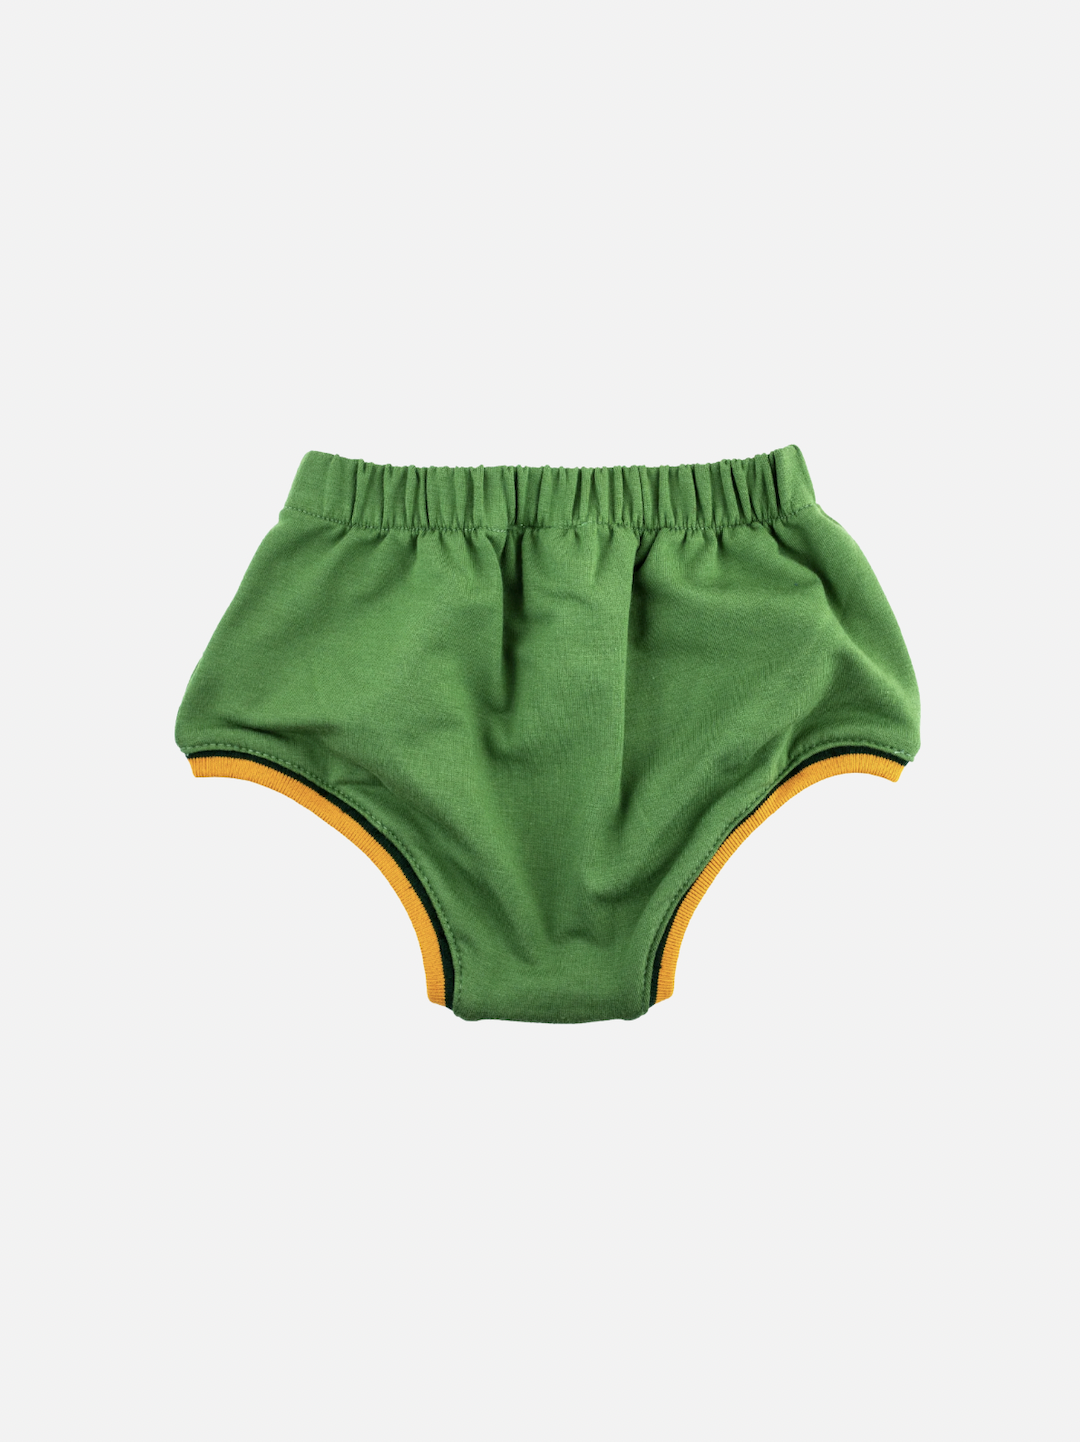 Mint | Mint green kids' bloomers with yellow trim at leg holes, back view